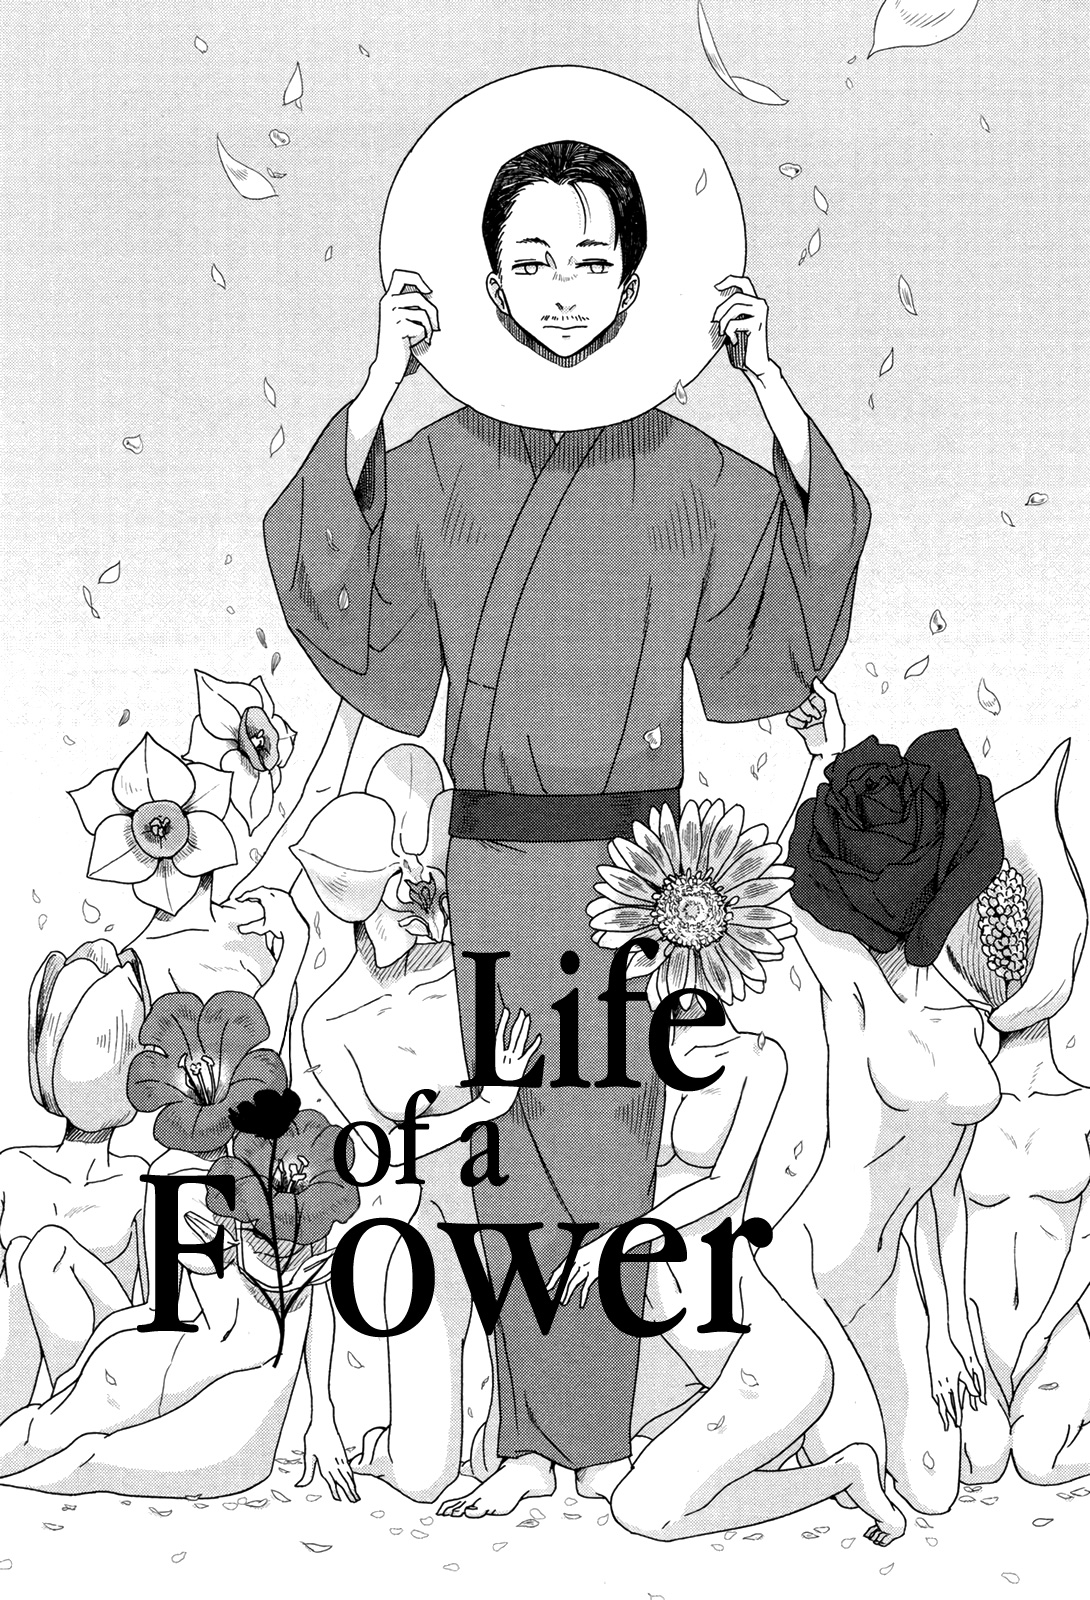 Life Is Full of Good byes Vol. 1 Ch. 7 Life of a Flower